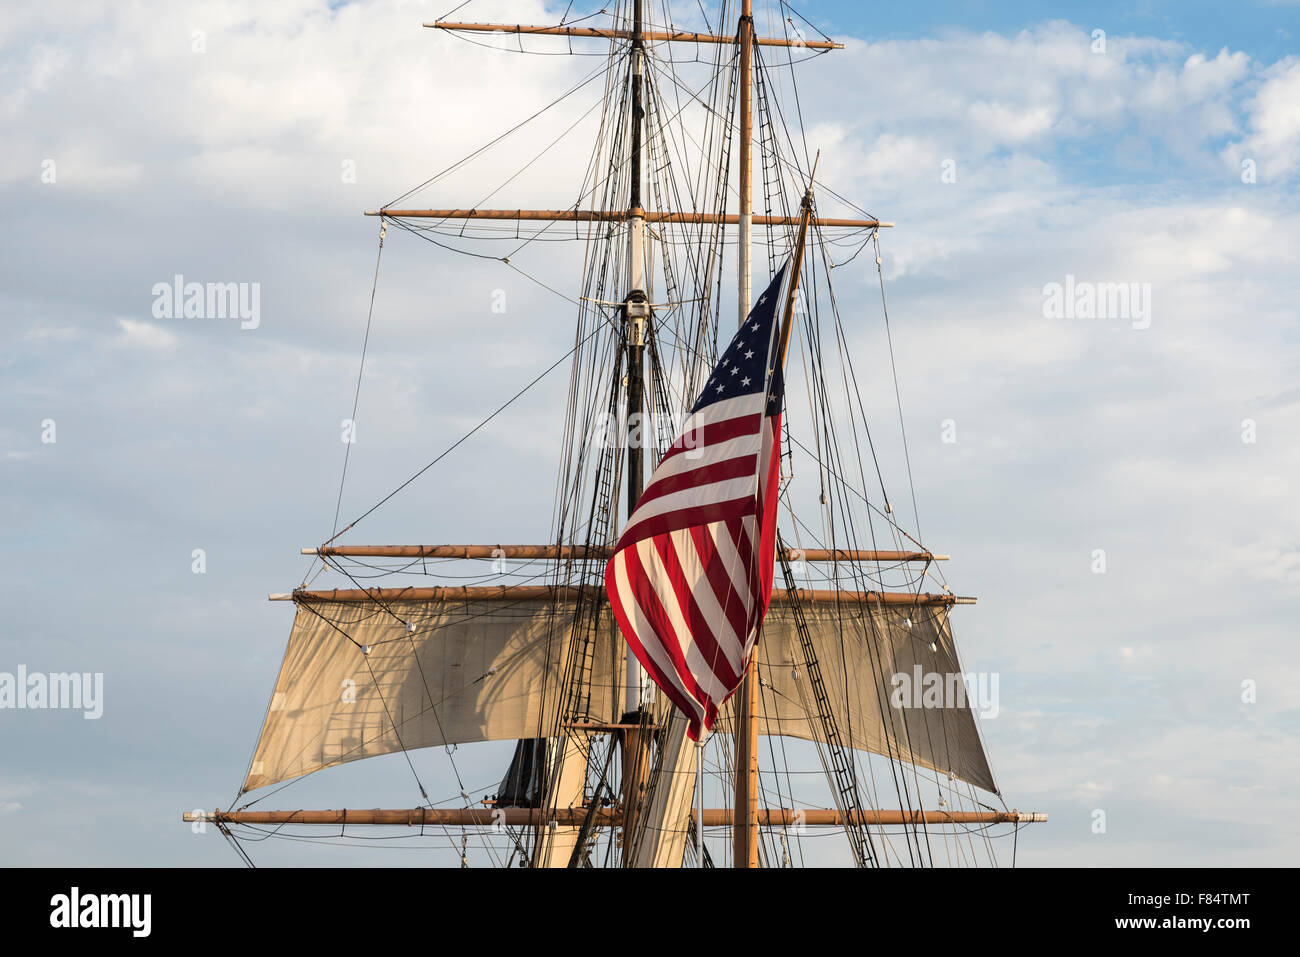 Large sized American Flag with boat mast and rigging. This is ship is called the Star Of India a tourist attraction. San Diego, California, USA. Stock Photo